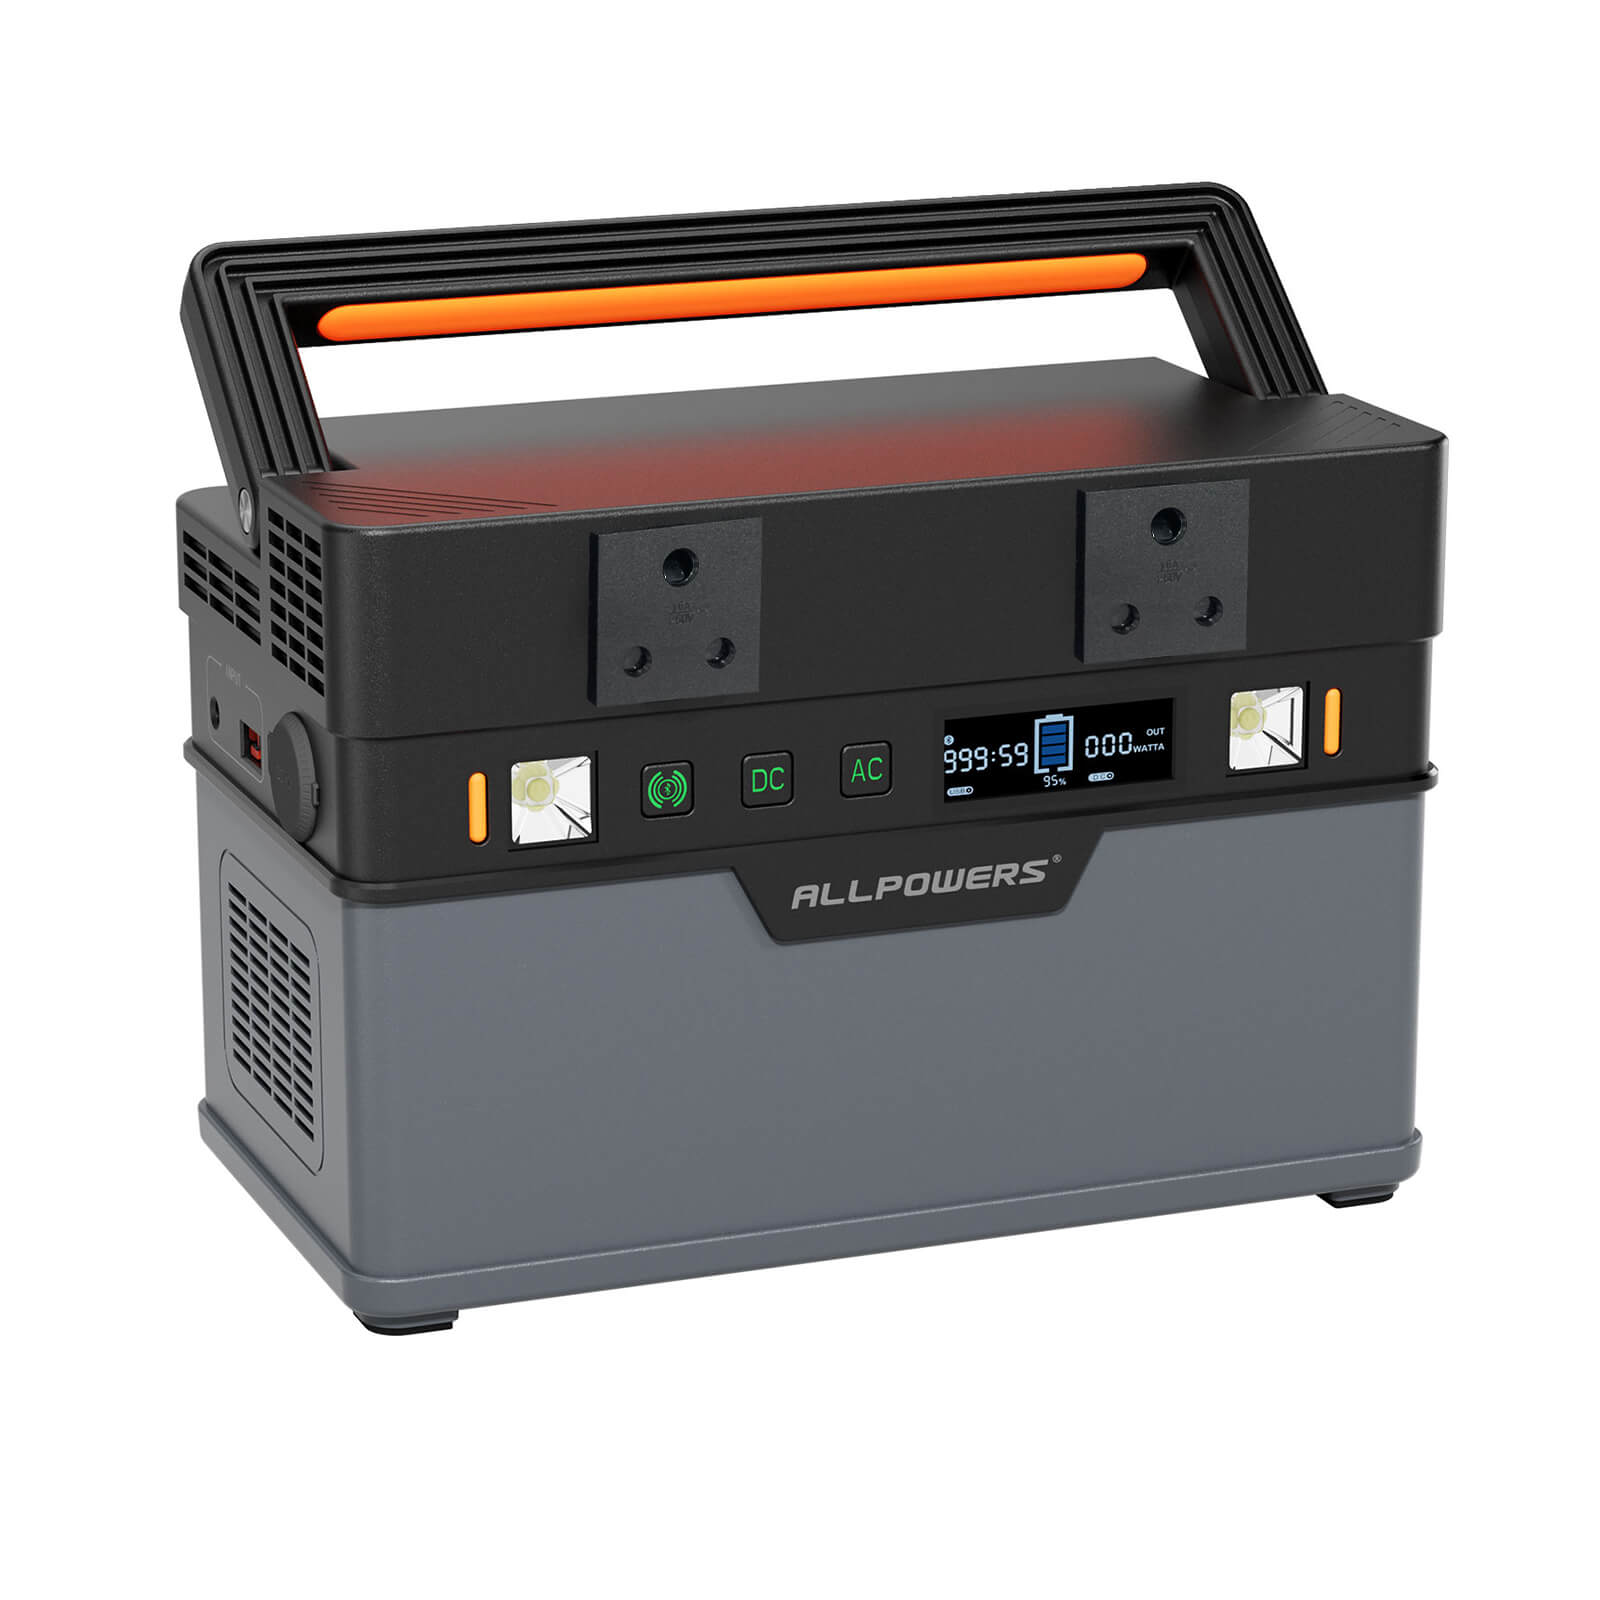 ALLPOWERS S700 Portable Power Station 700W 606Wh